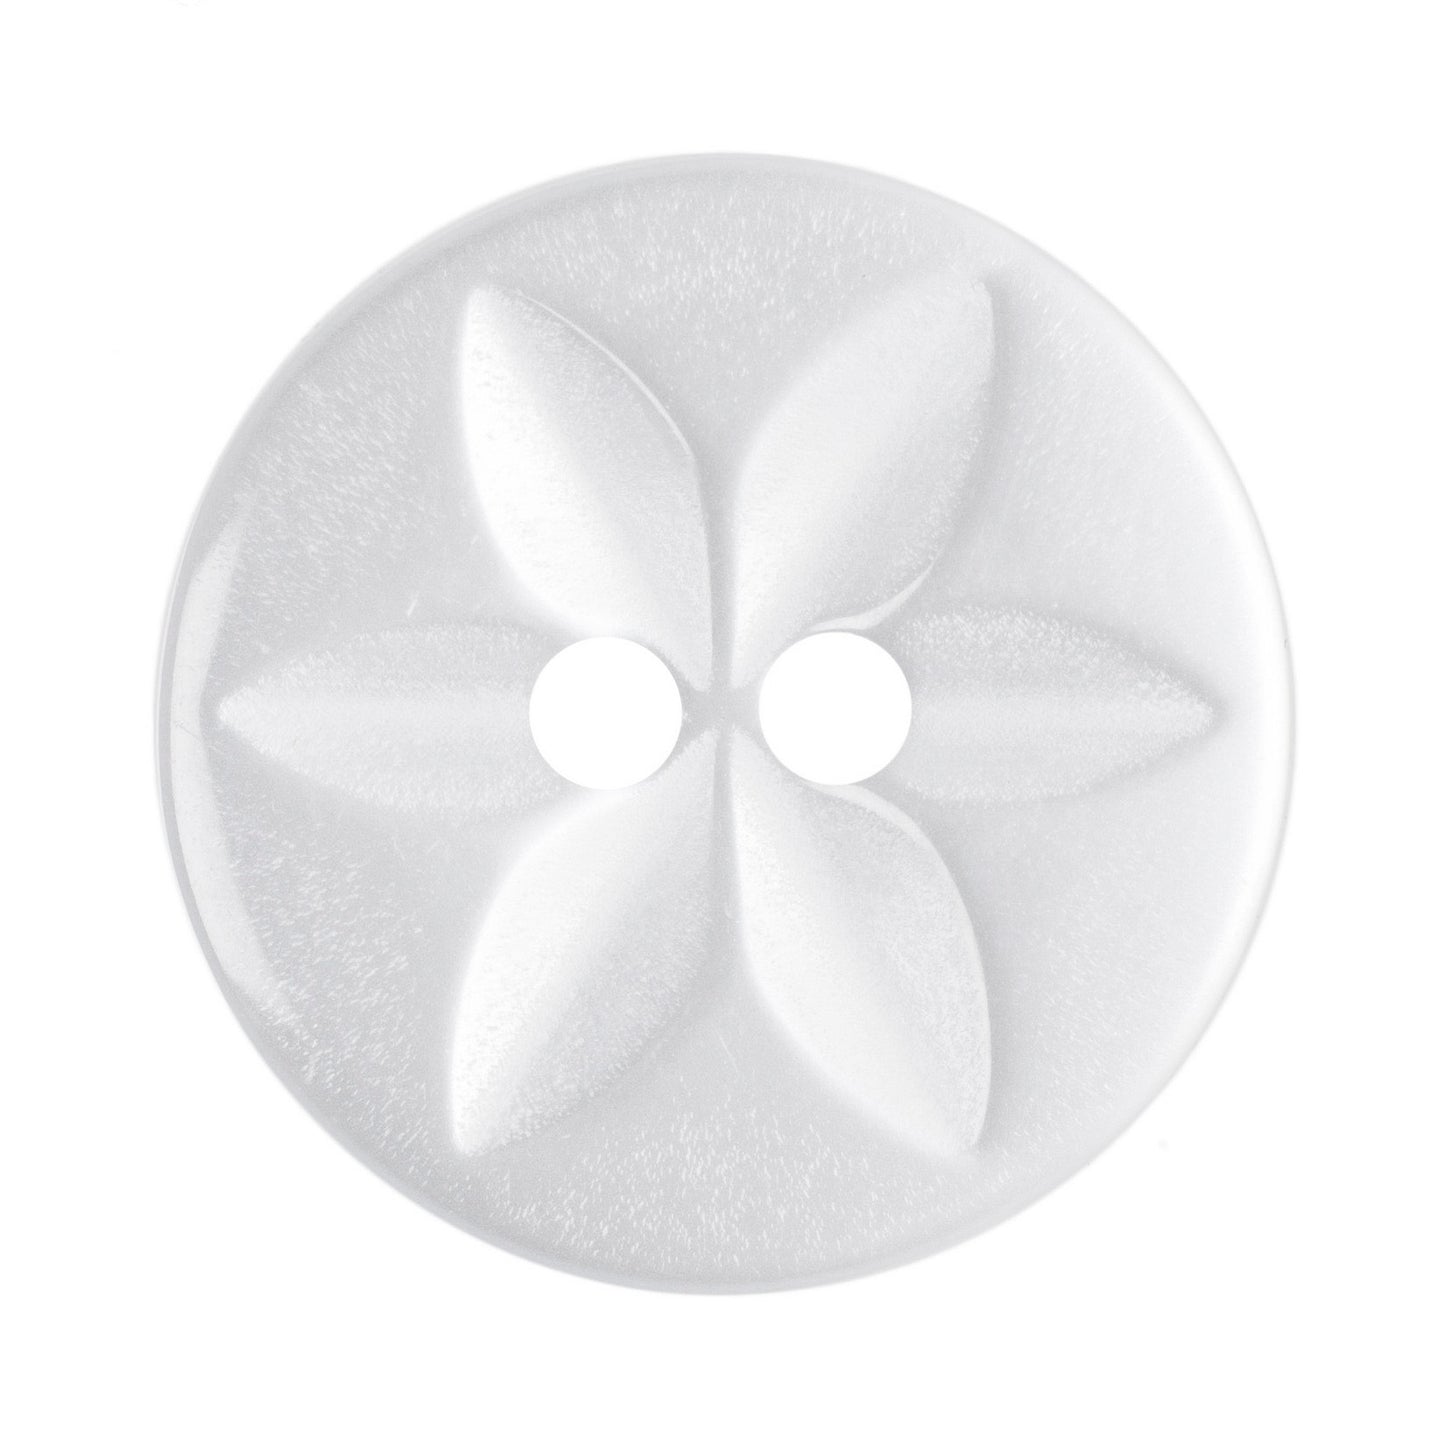 Star Buttons - White 16mm